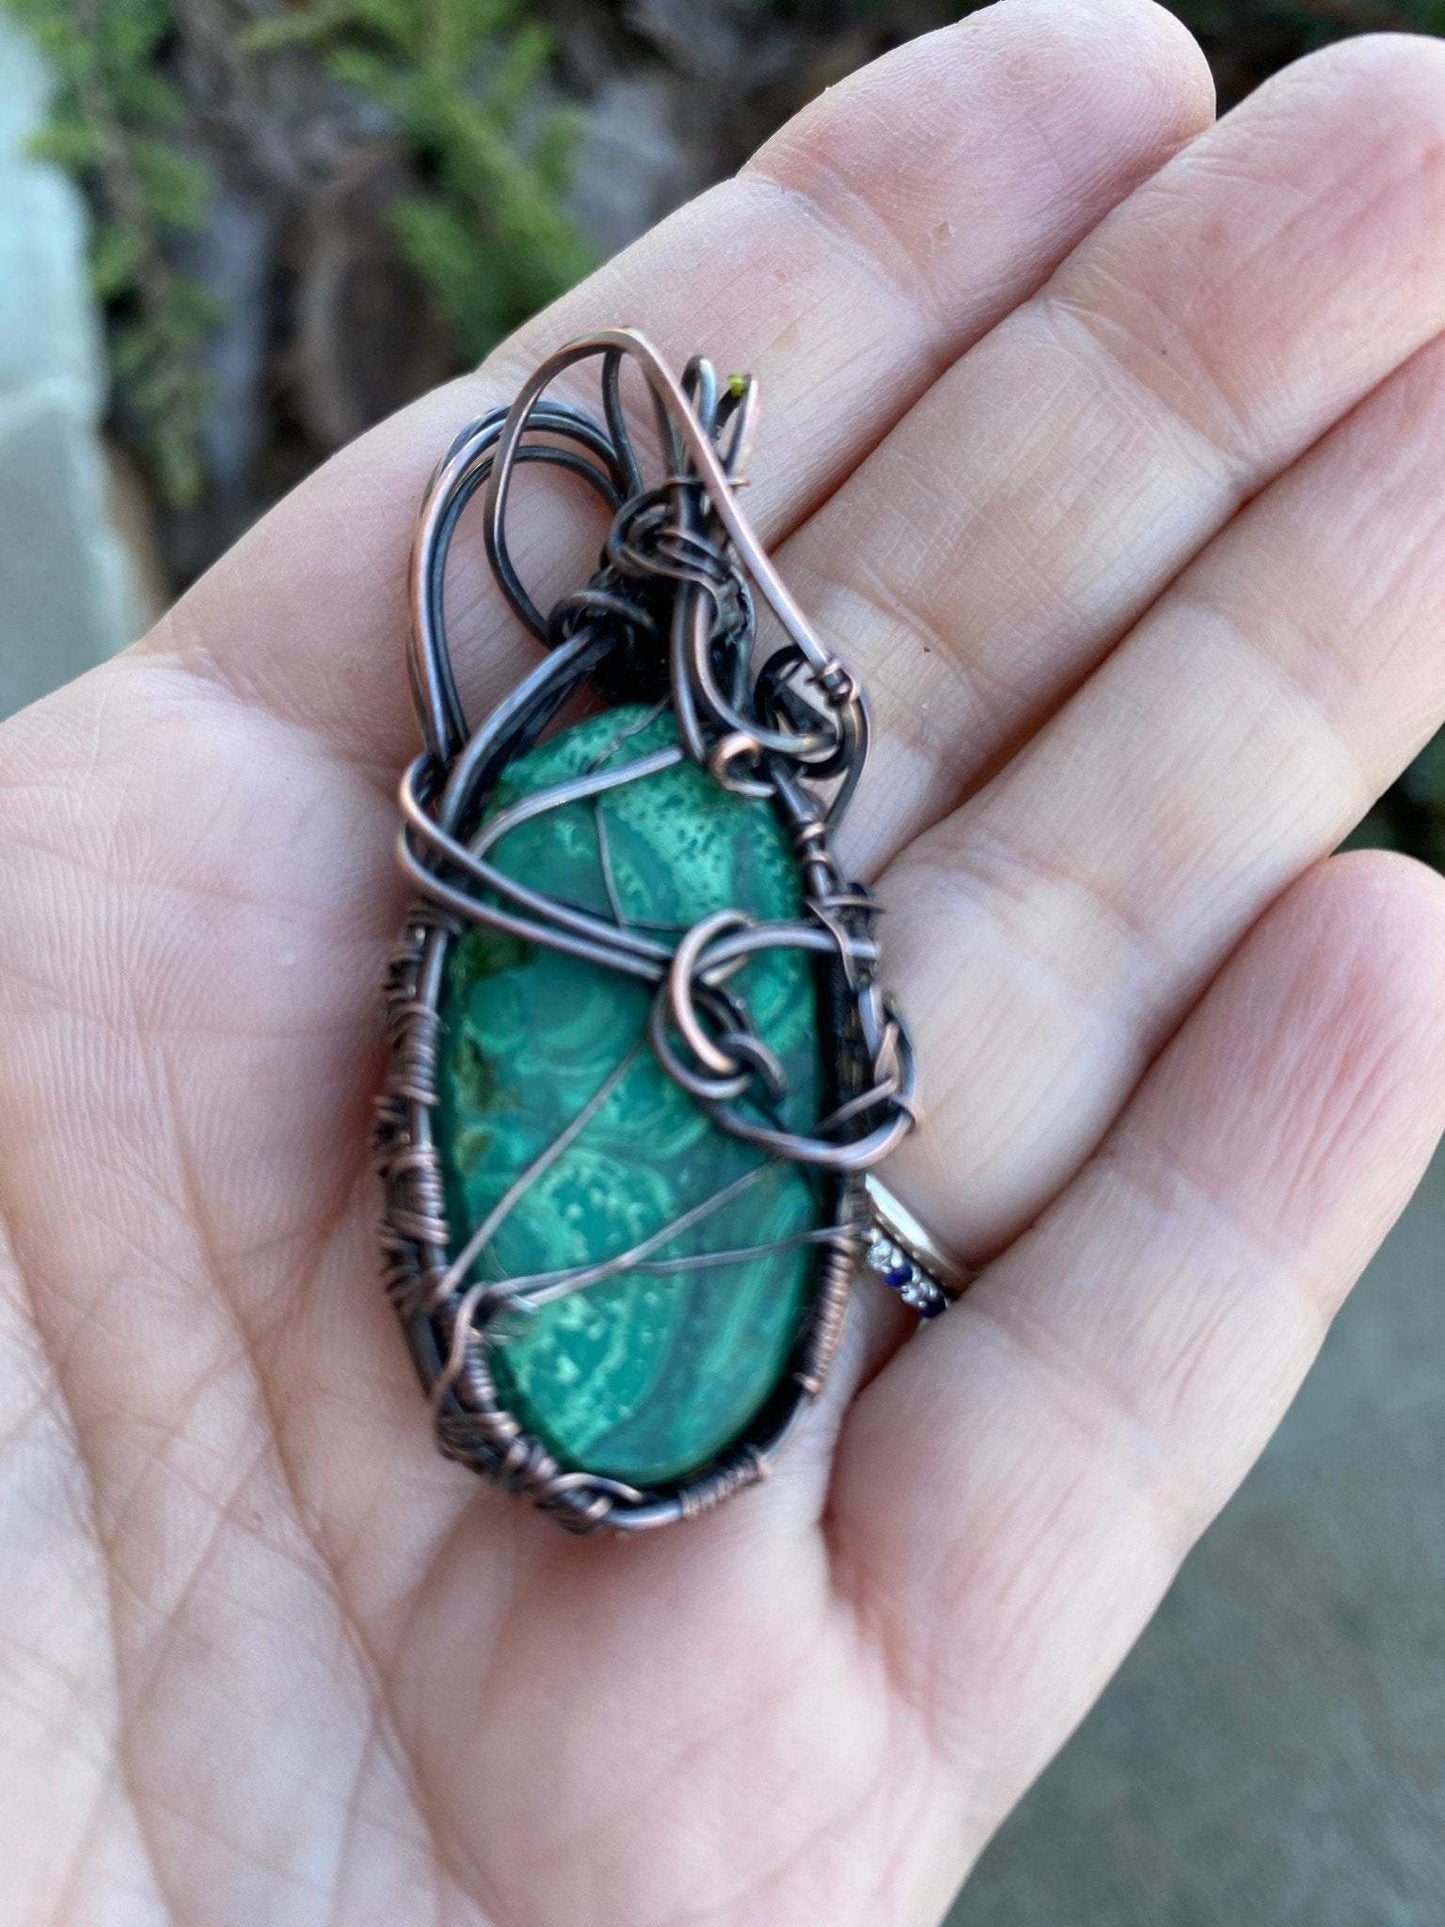 Malachite Wire Wrapped Pendant With Copper Bead Embellishments